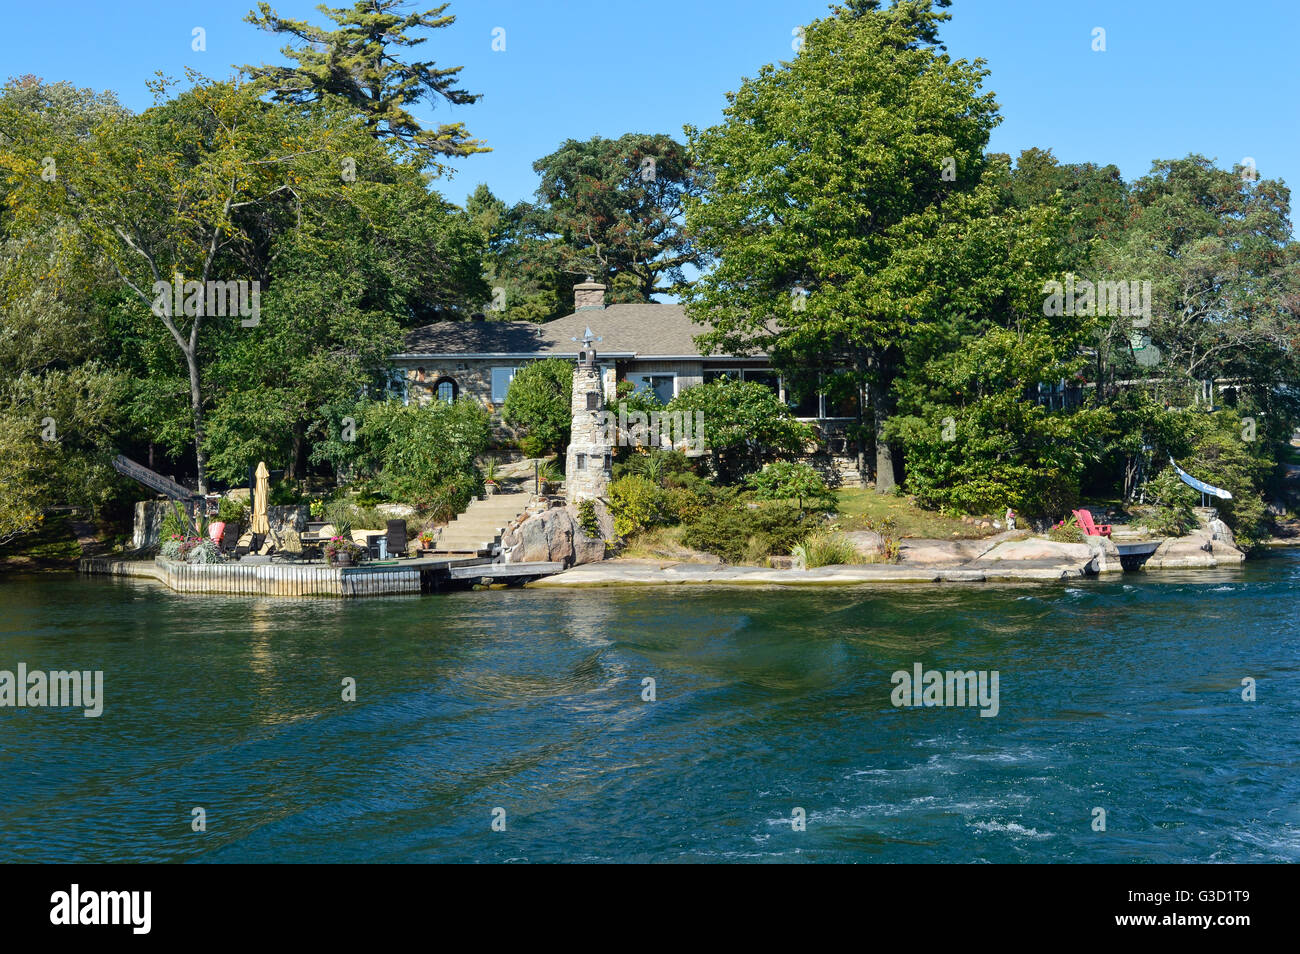 Kingston, Canada - September 23, 2015: One Island in Thousand Islands Region in summer in Kingston, Ontario, Canada Stock Photo